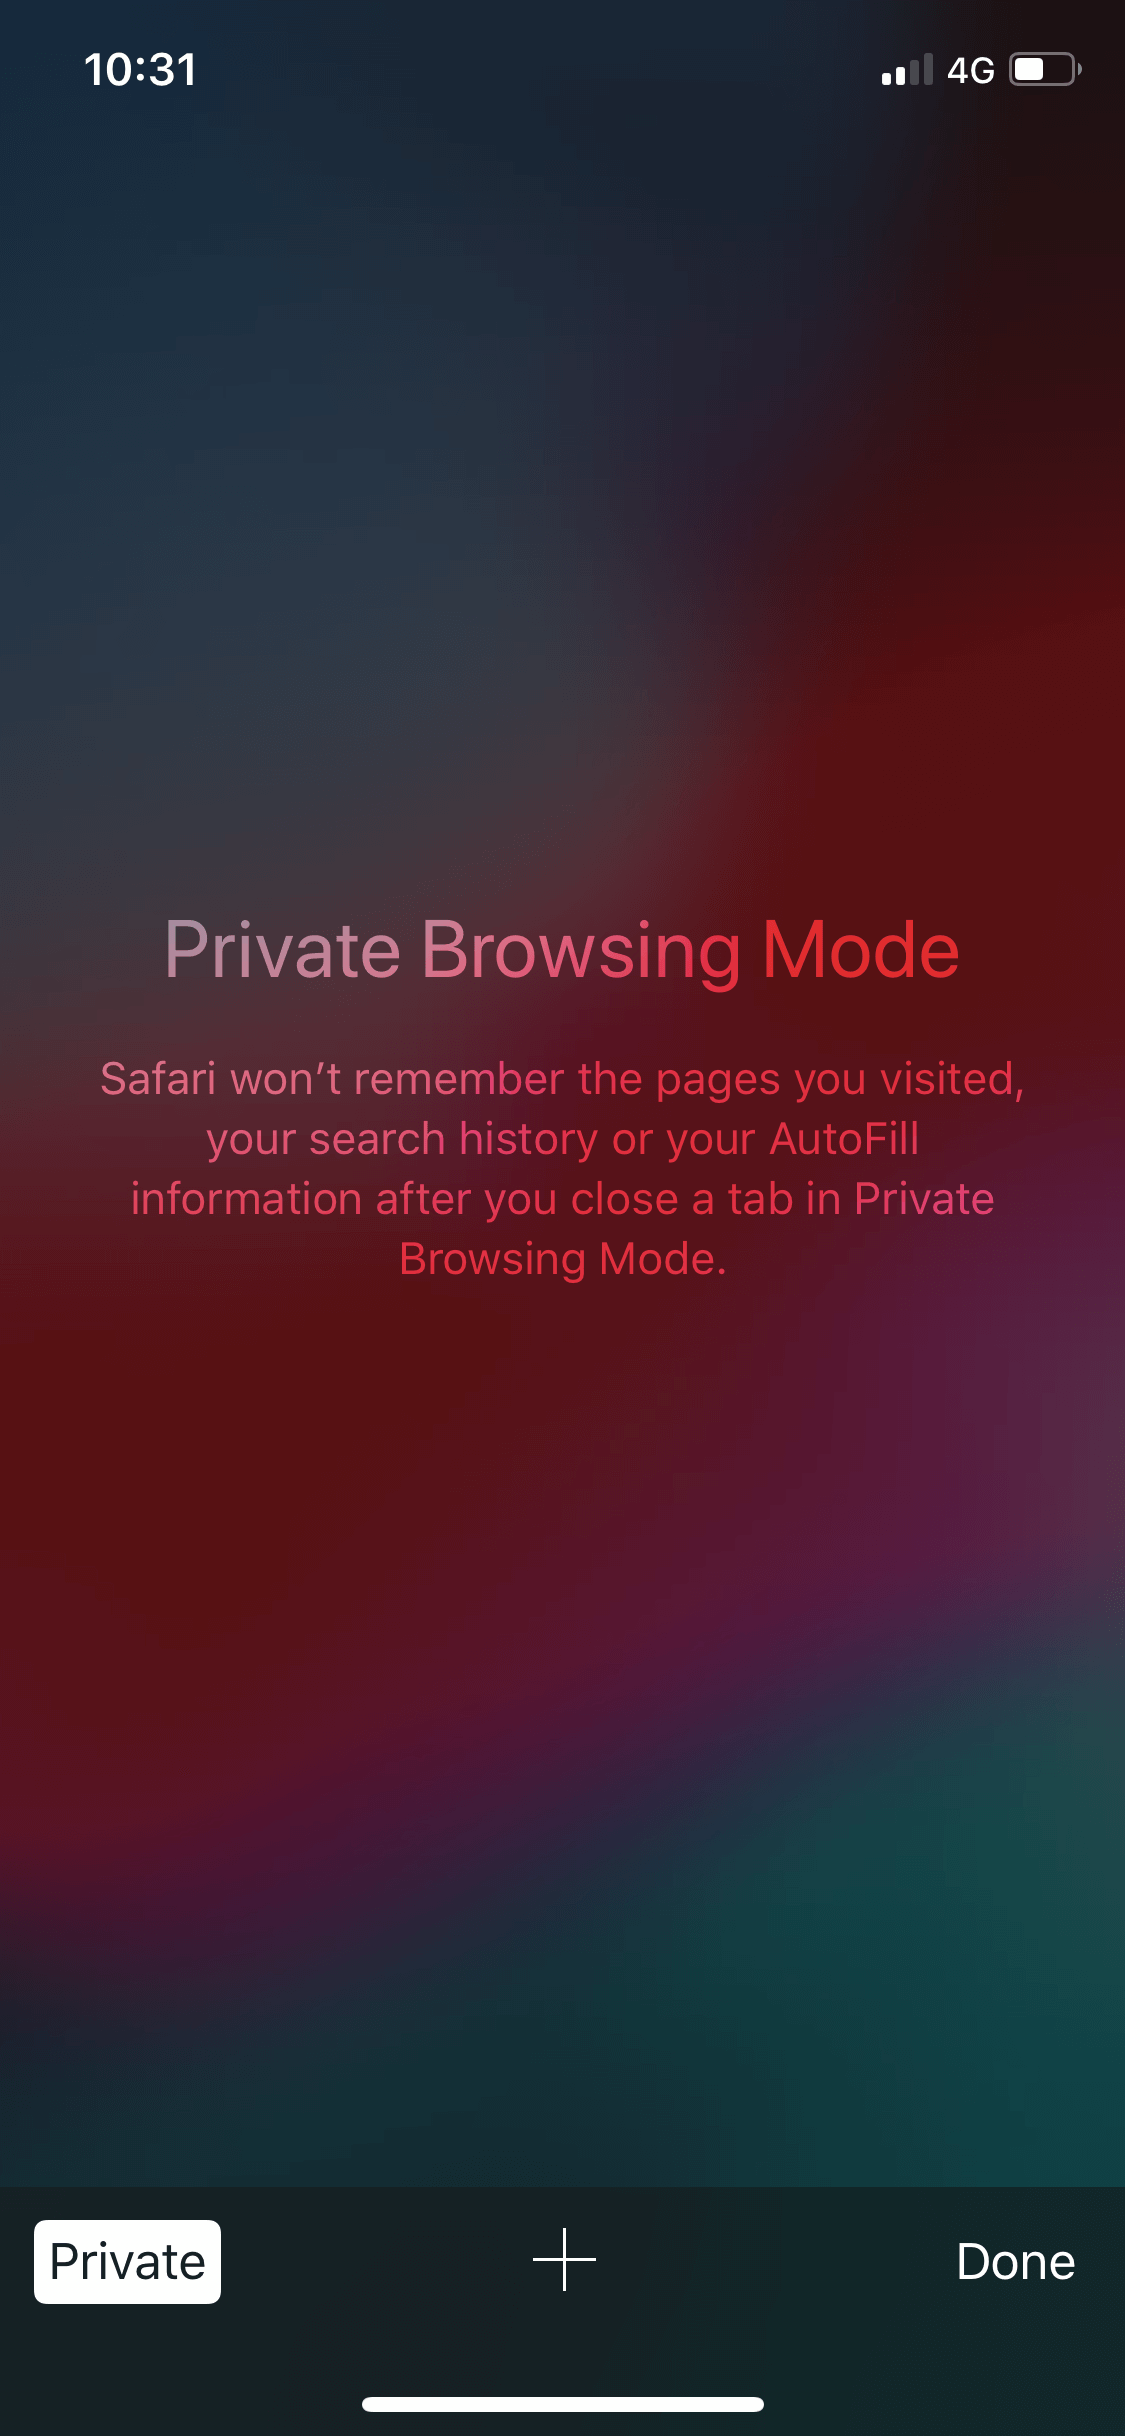 Once the private mode will be activated, the entire browsing tab will turn into grey color